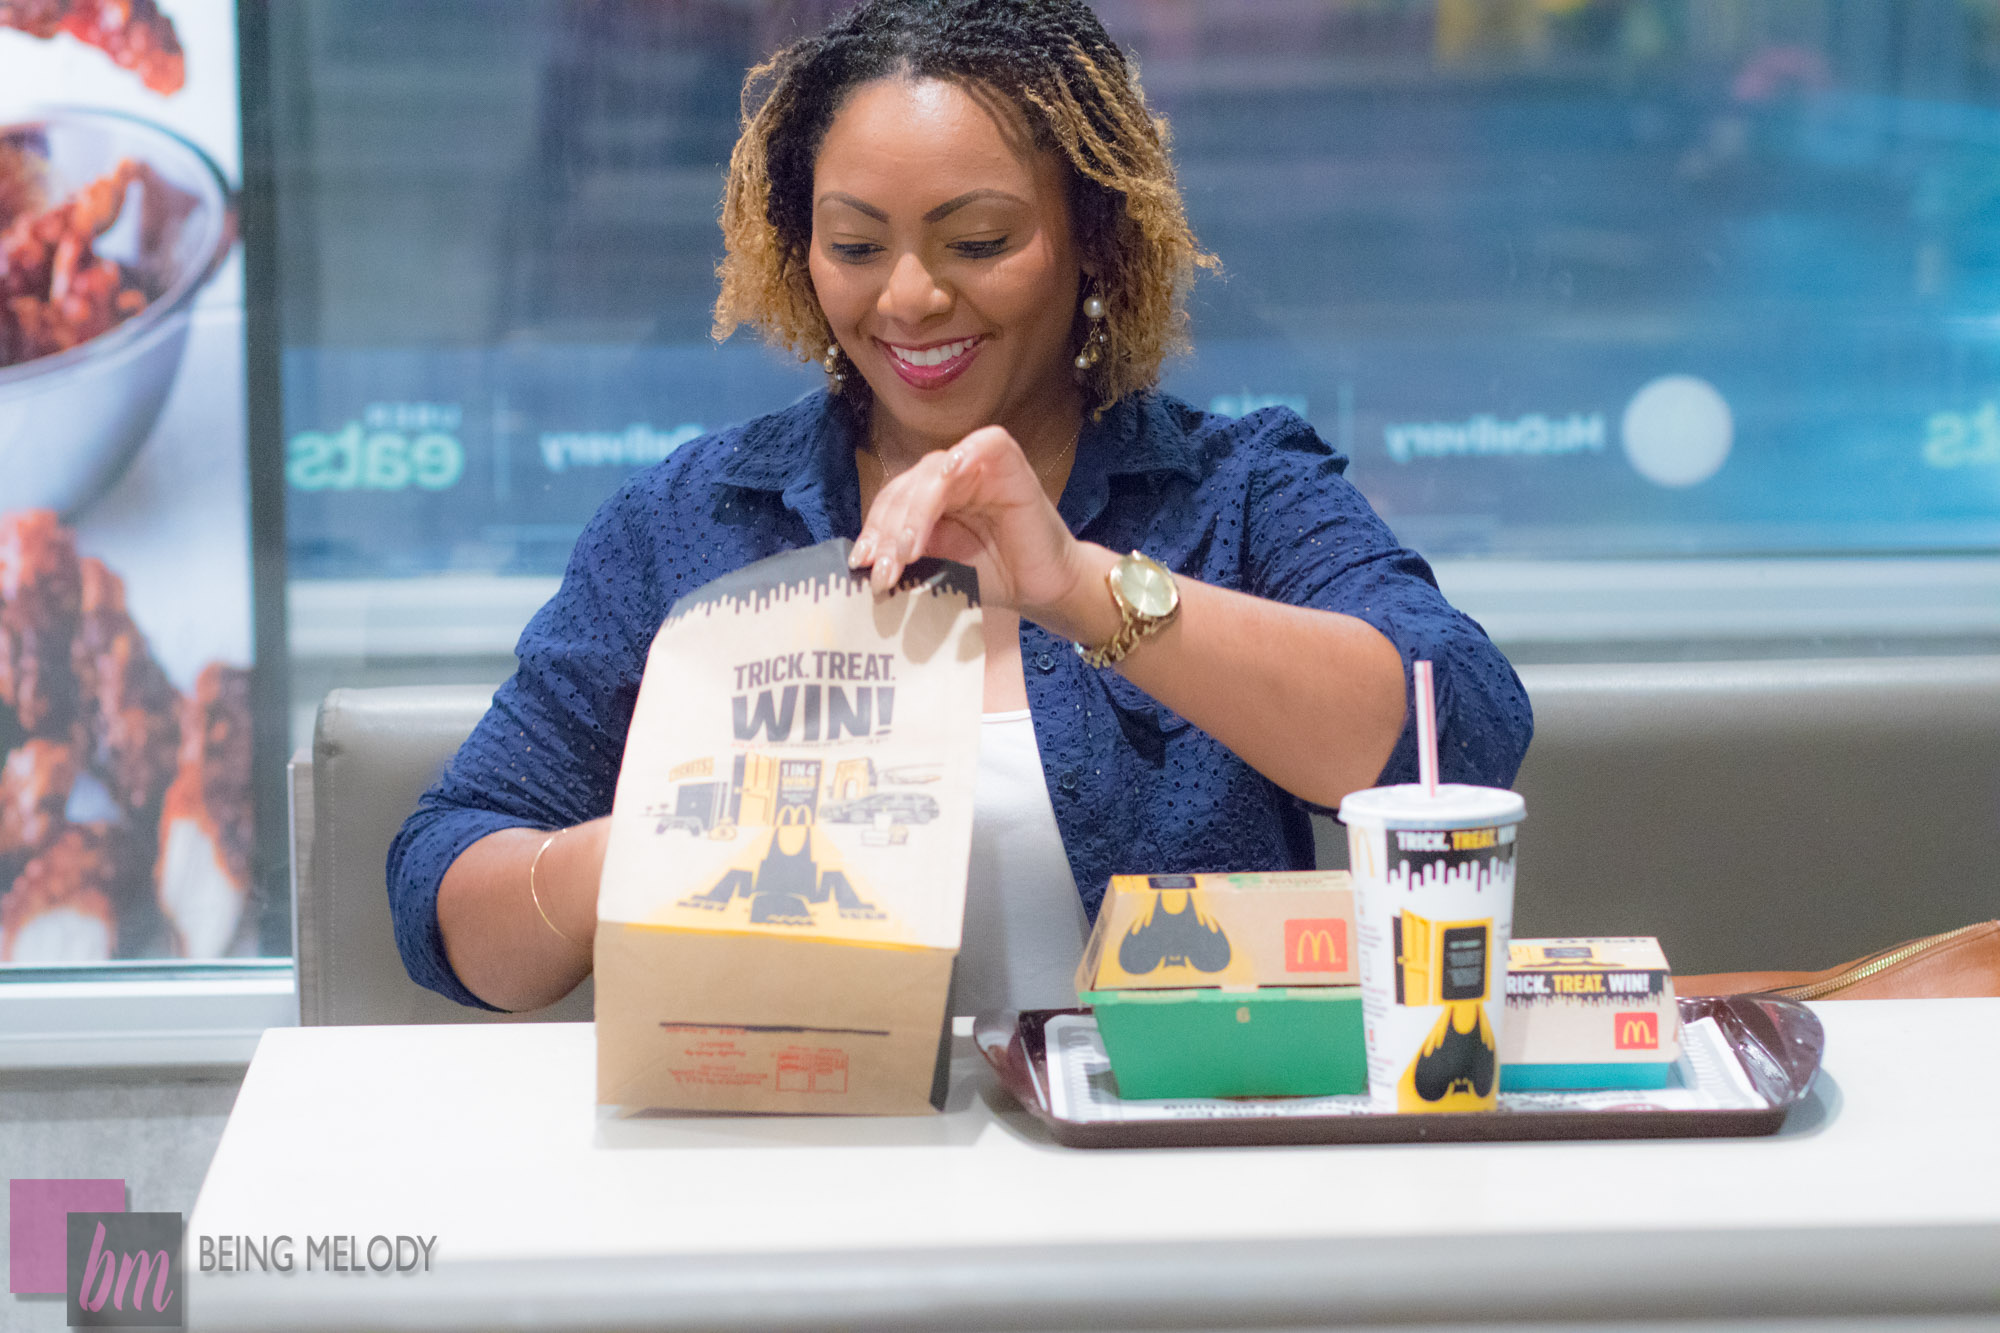 Winning Isn’t Always Easy, But McDonald’s Helps you Get Pretty Close.